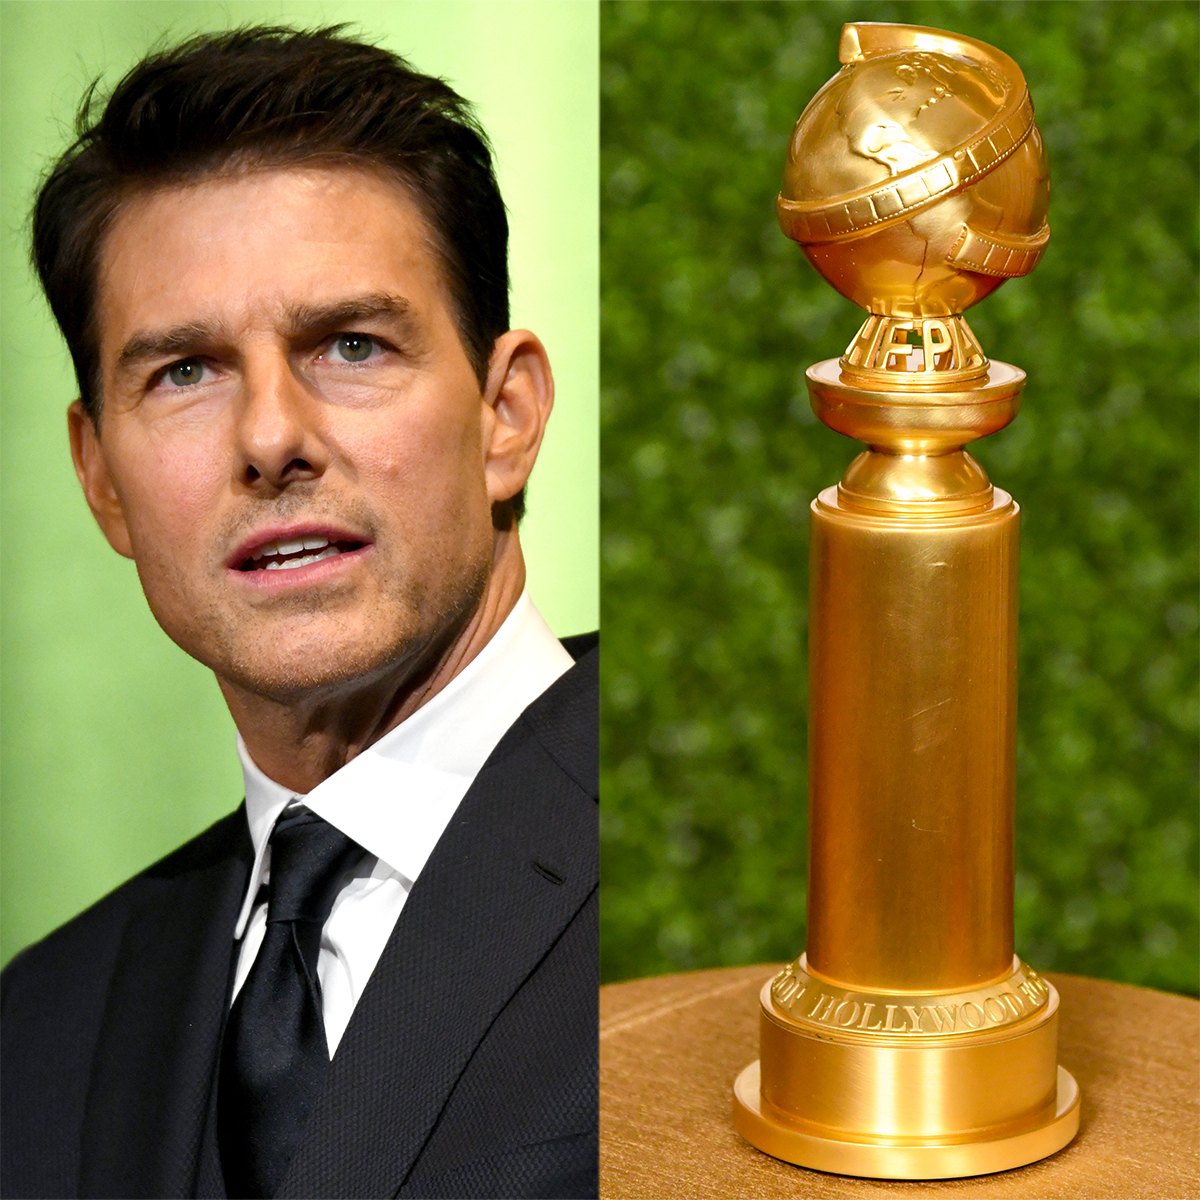 Tom Cruise Returns Golden Globe Trophies to HFPA as NBC Skips 2022 Broadcast